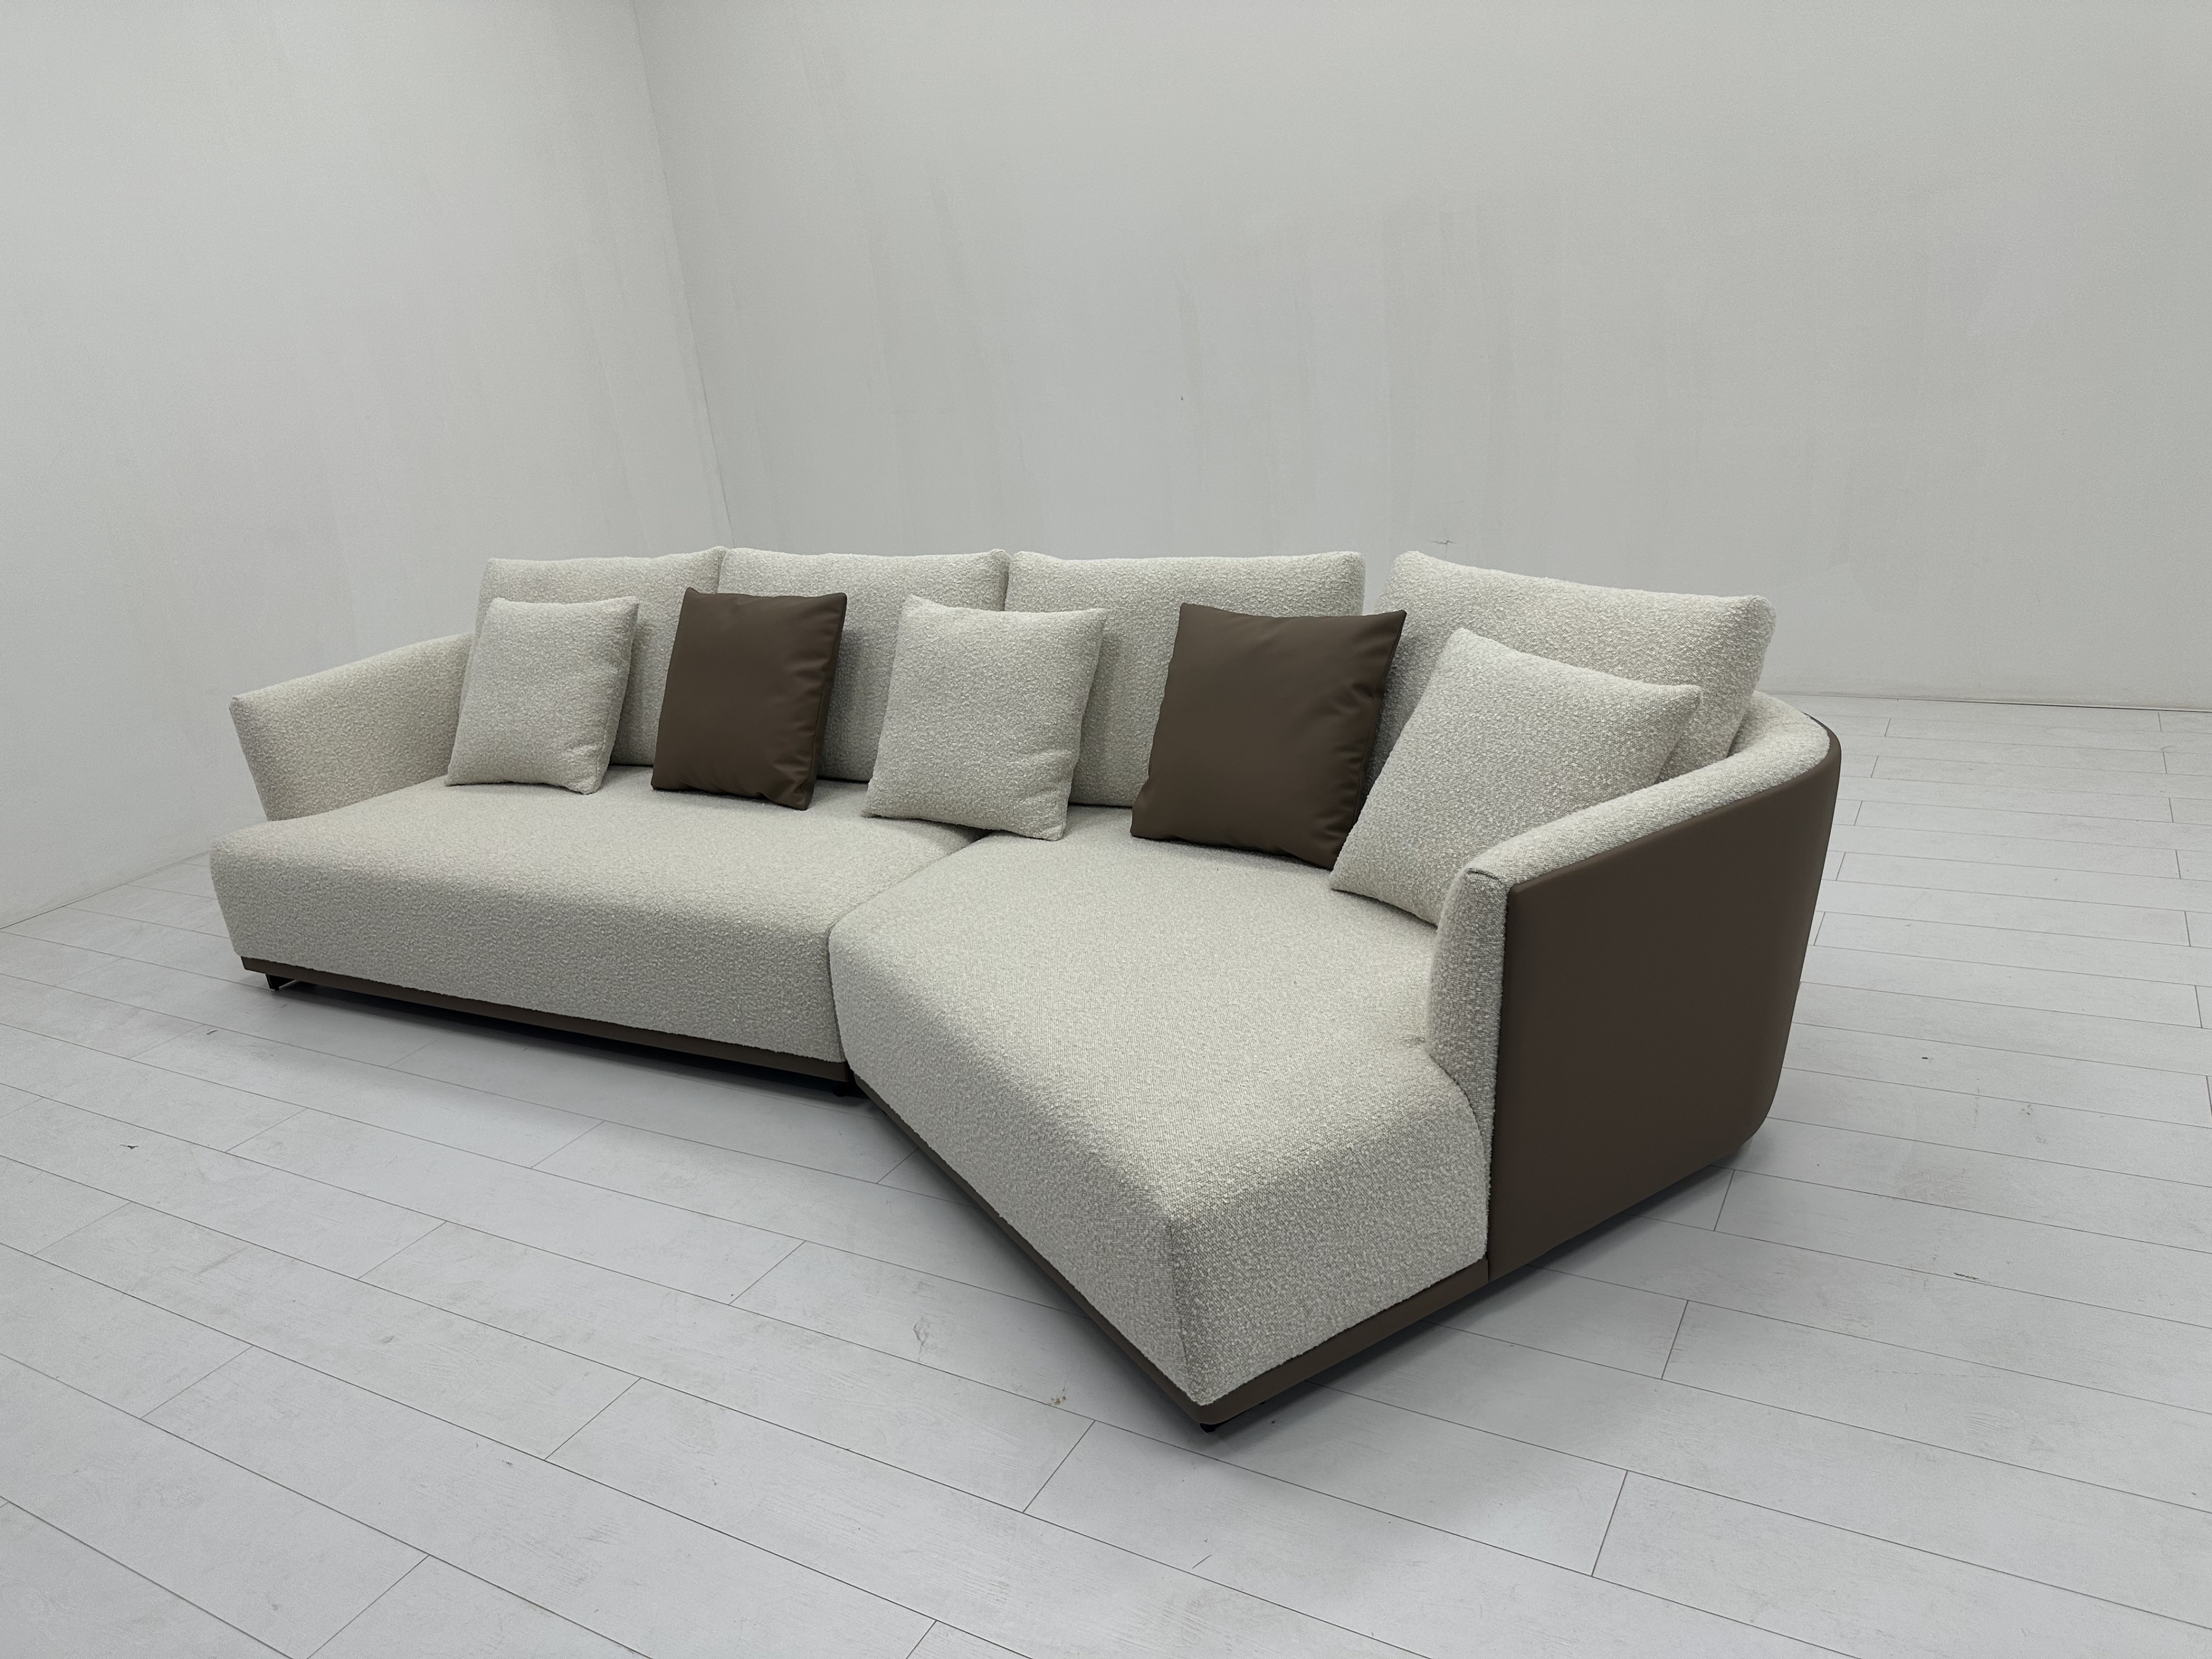 Soft Comform Fabric Sofa Matching with Leather